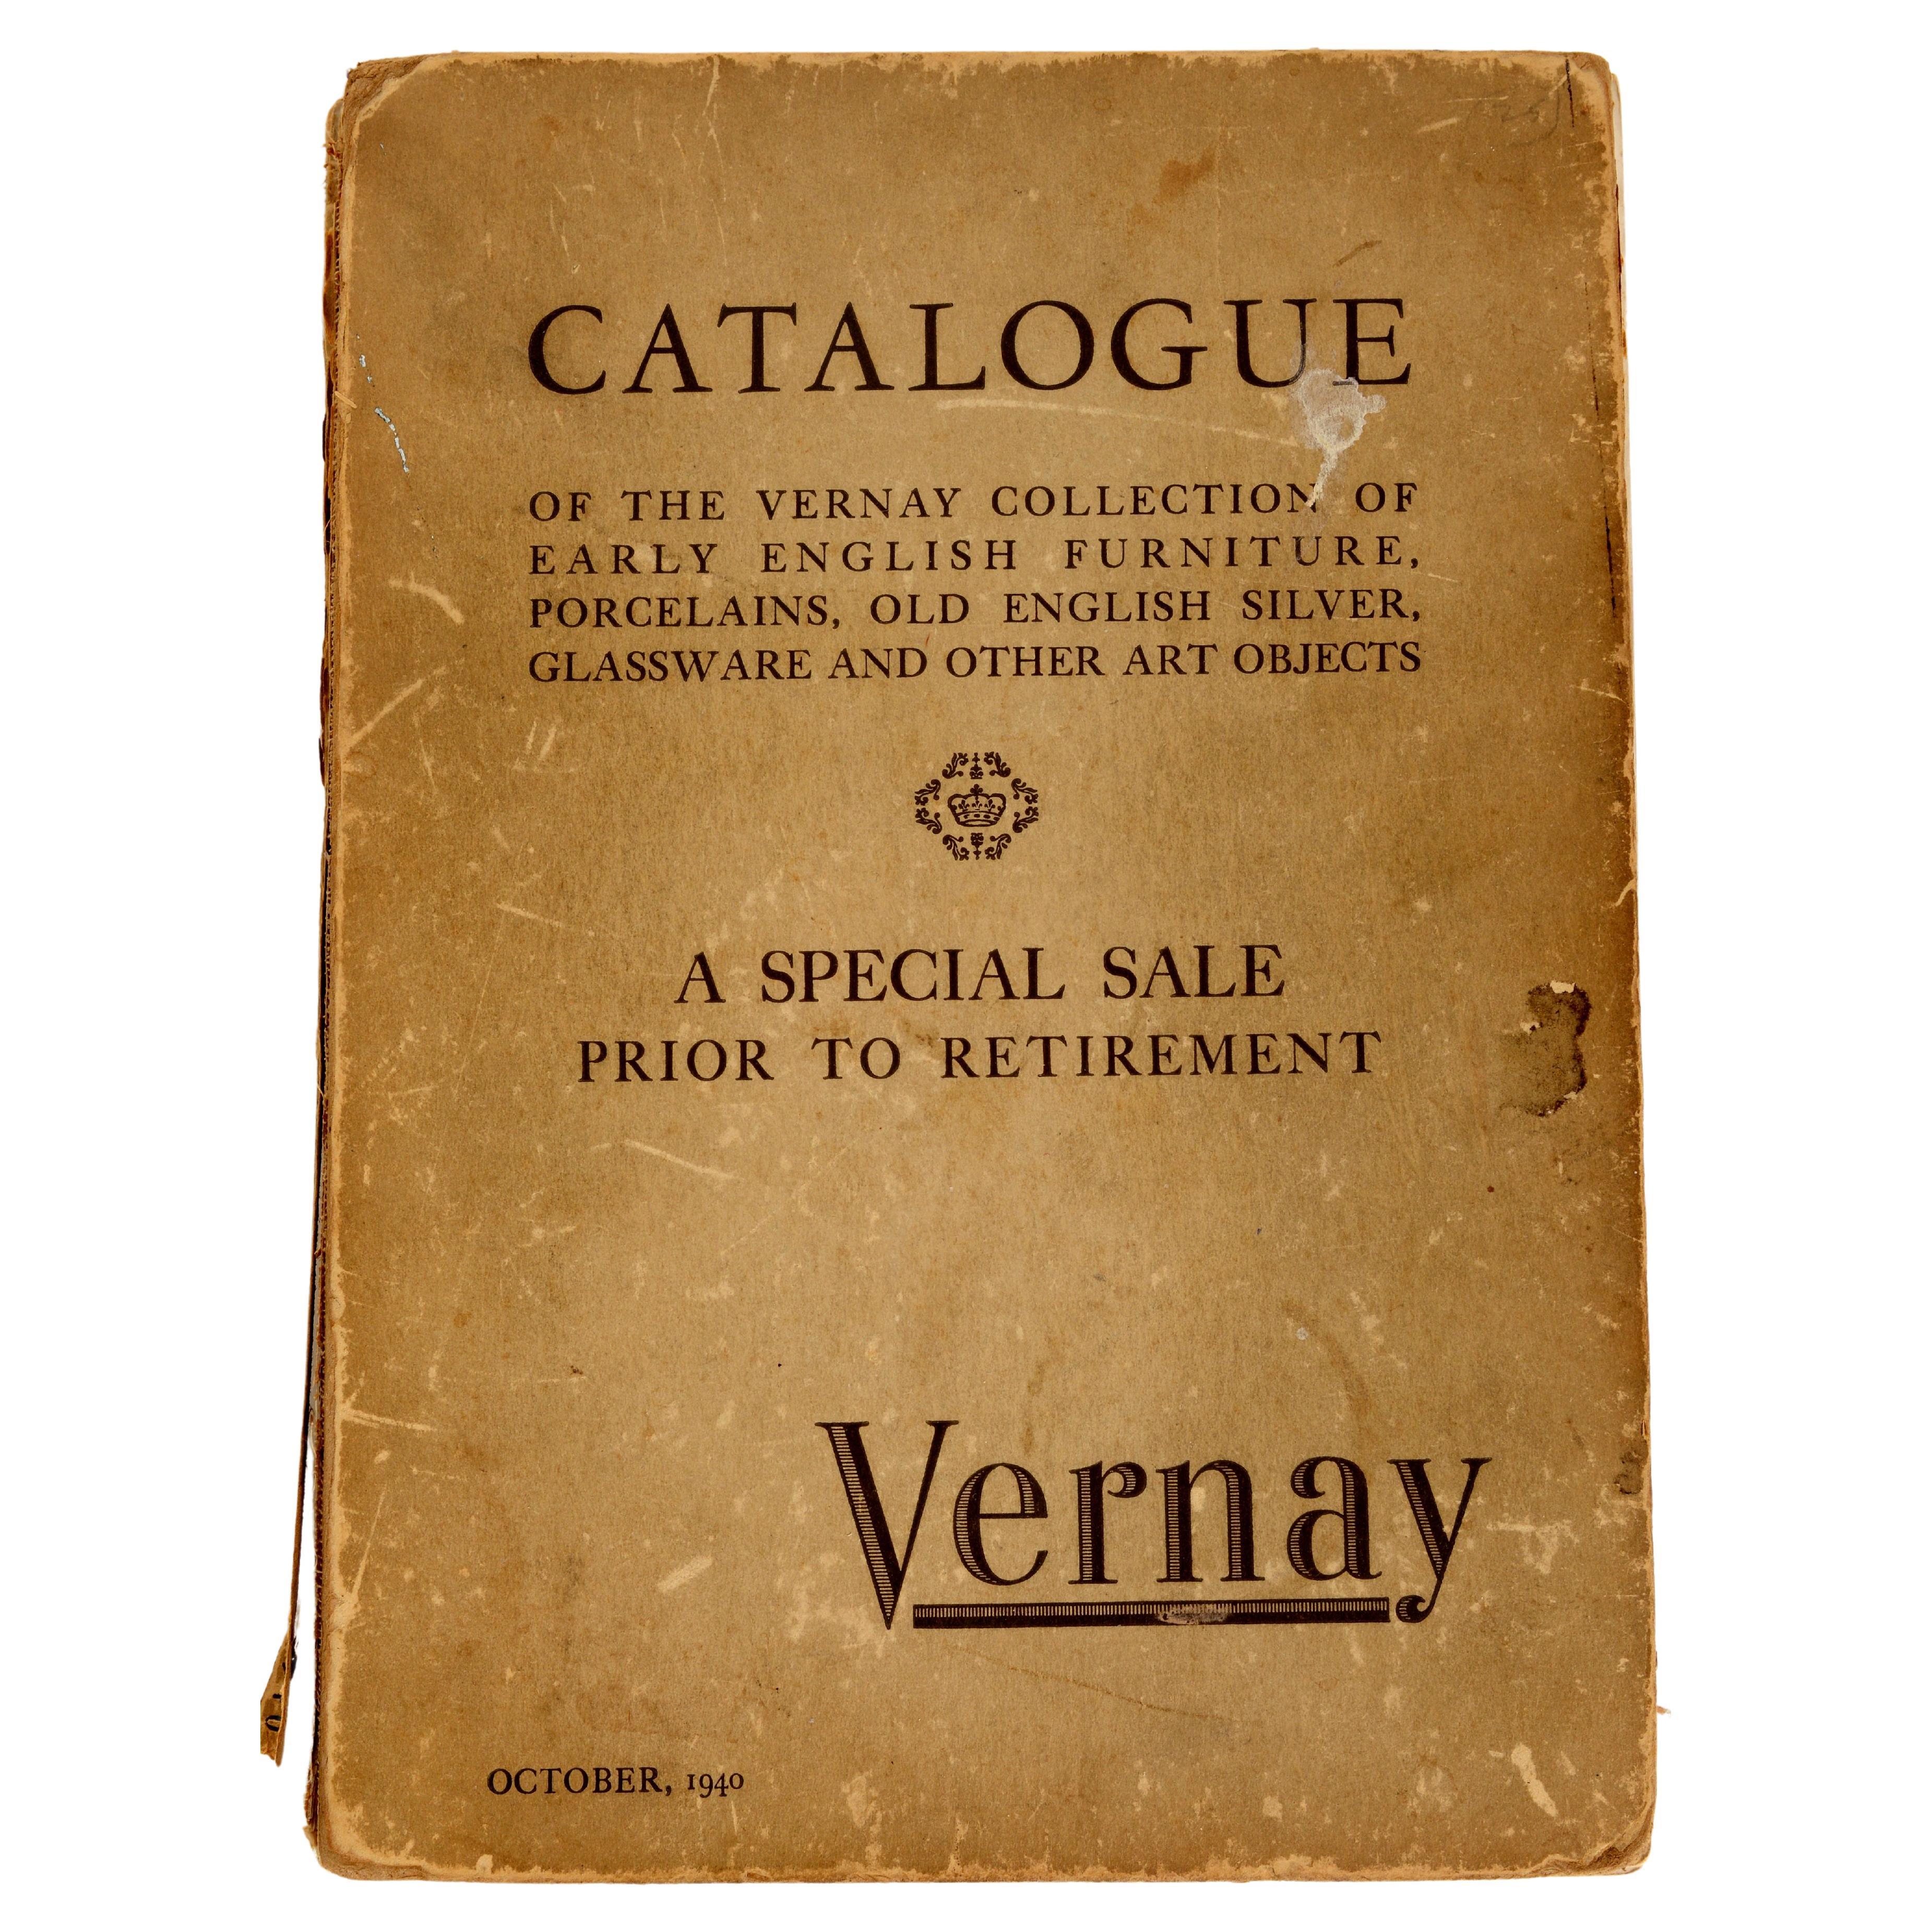 Catalogue of the Vernay Collection A Special Sale Prior to Retirement, 1st Ed